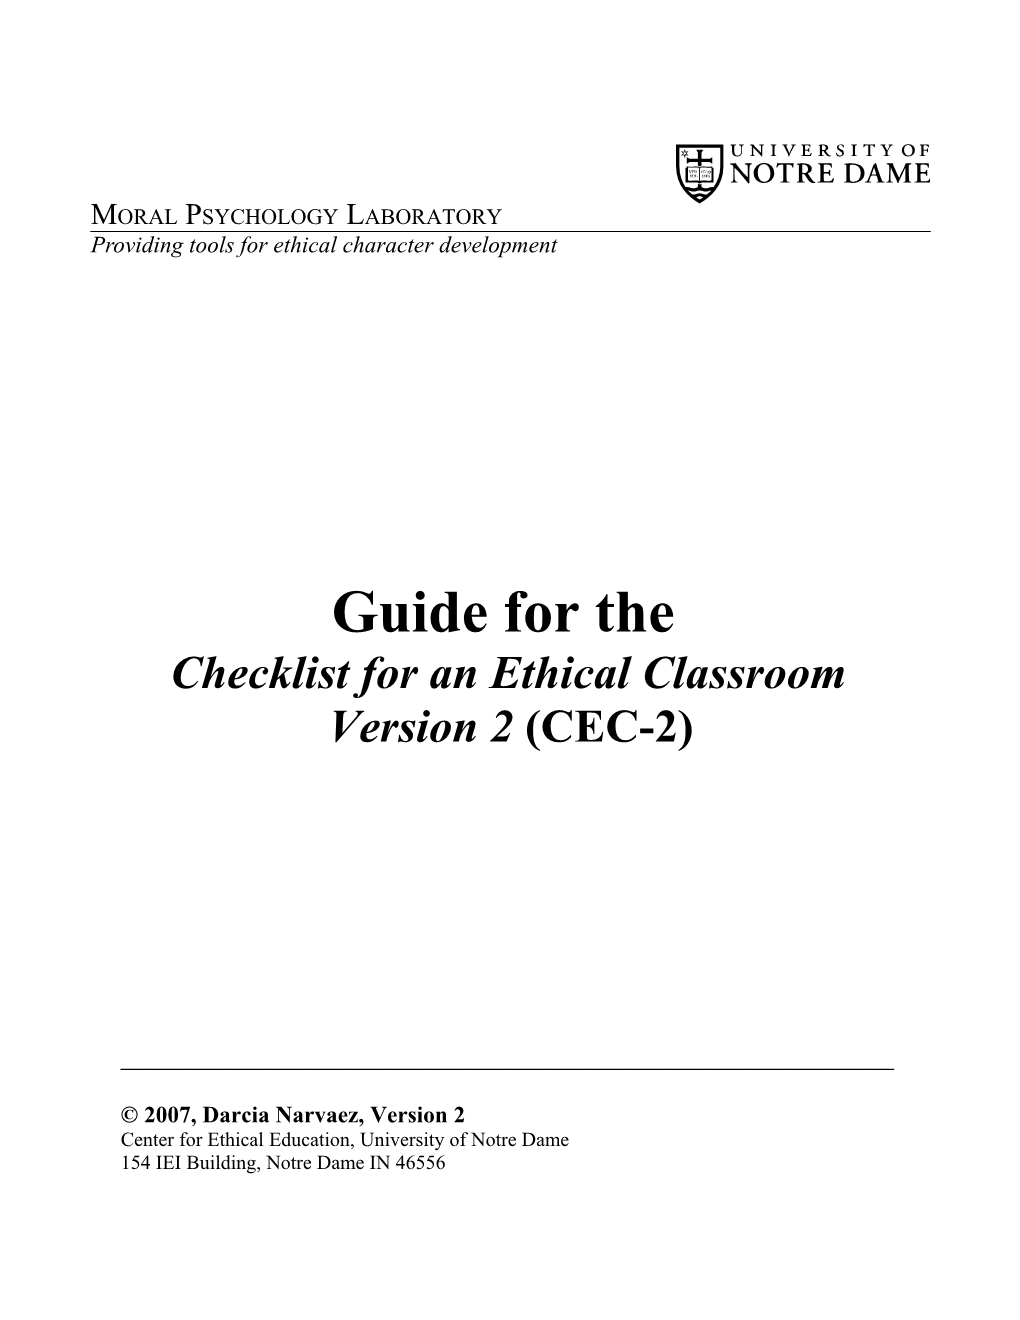 Checklist for an Ethical Classroom Version 2(CEC-2)